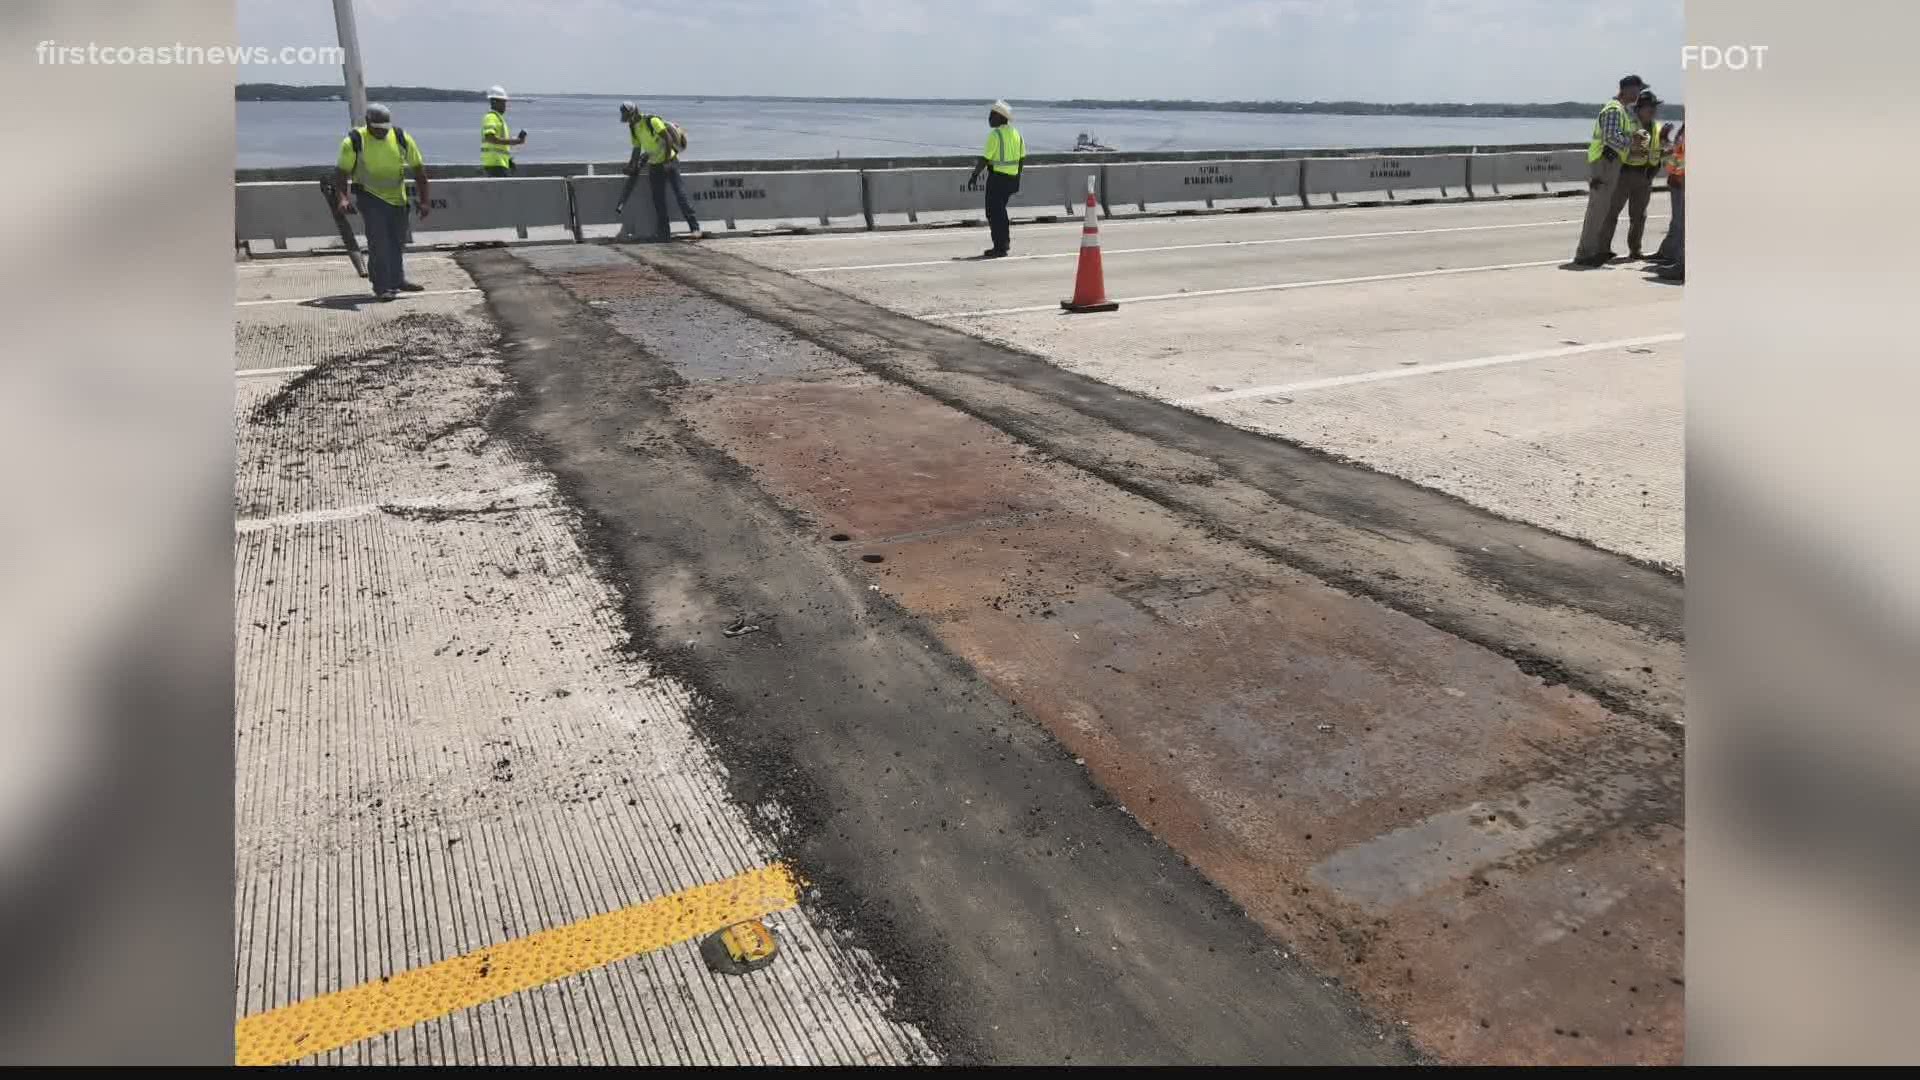 A problem with finger joints on the southbound lanes of I-295 on the bridge forced crews to shut the lanes for hours Thursday. Now, a temporary fix is in place.